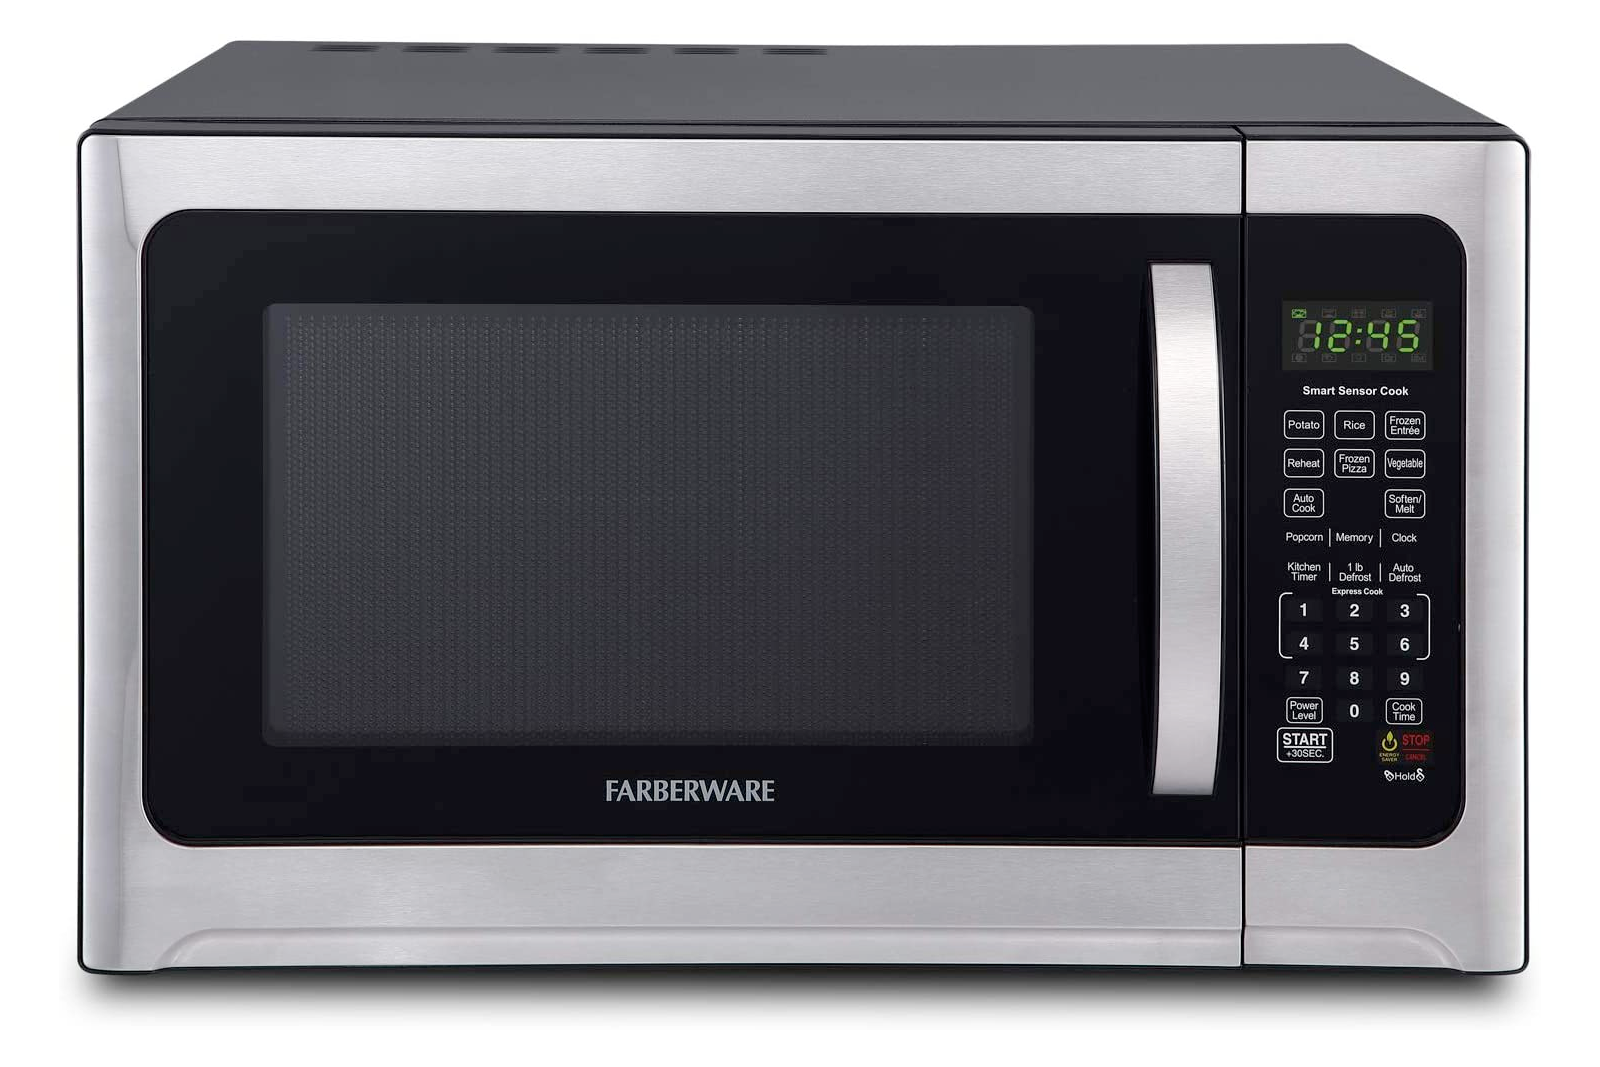 best smart ovens the technology changing the way we cook photo 21